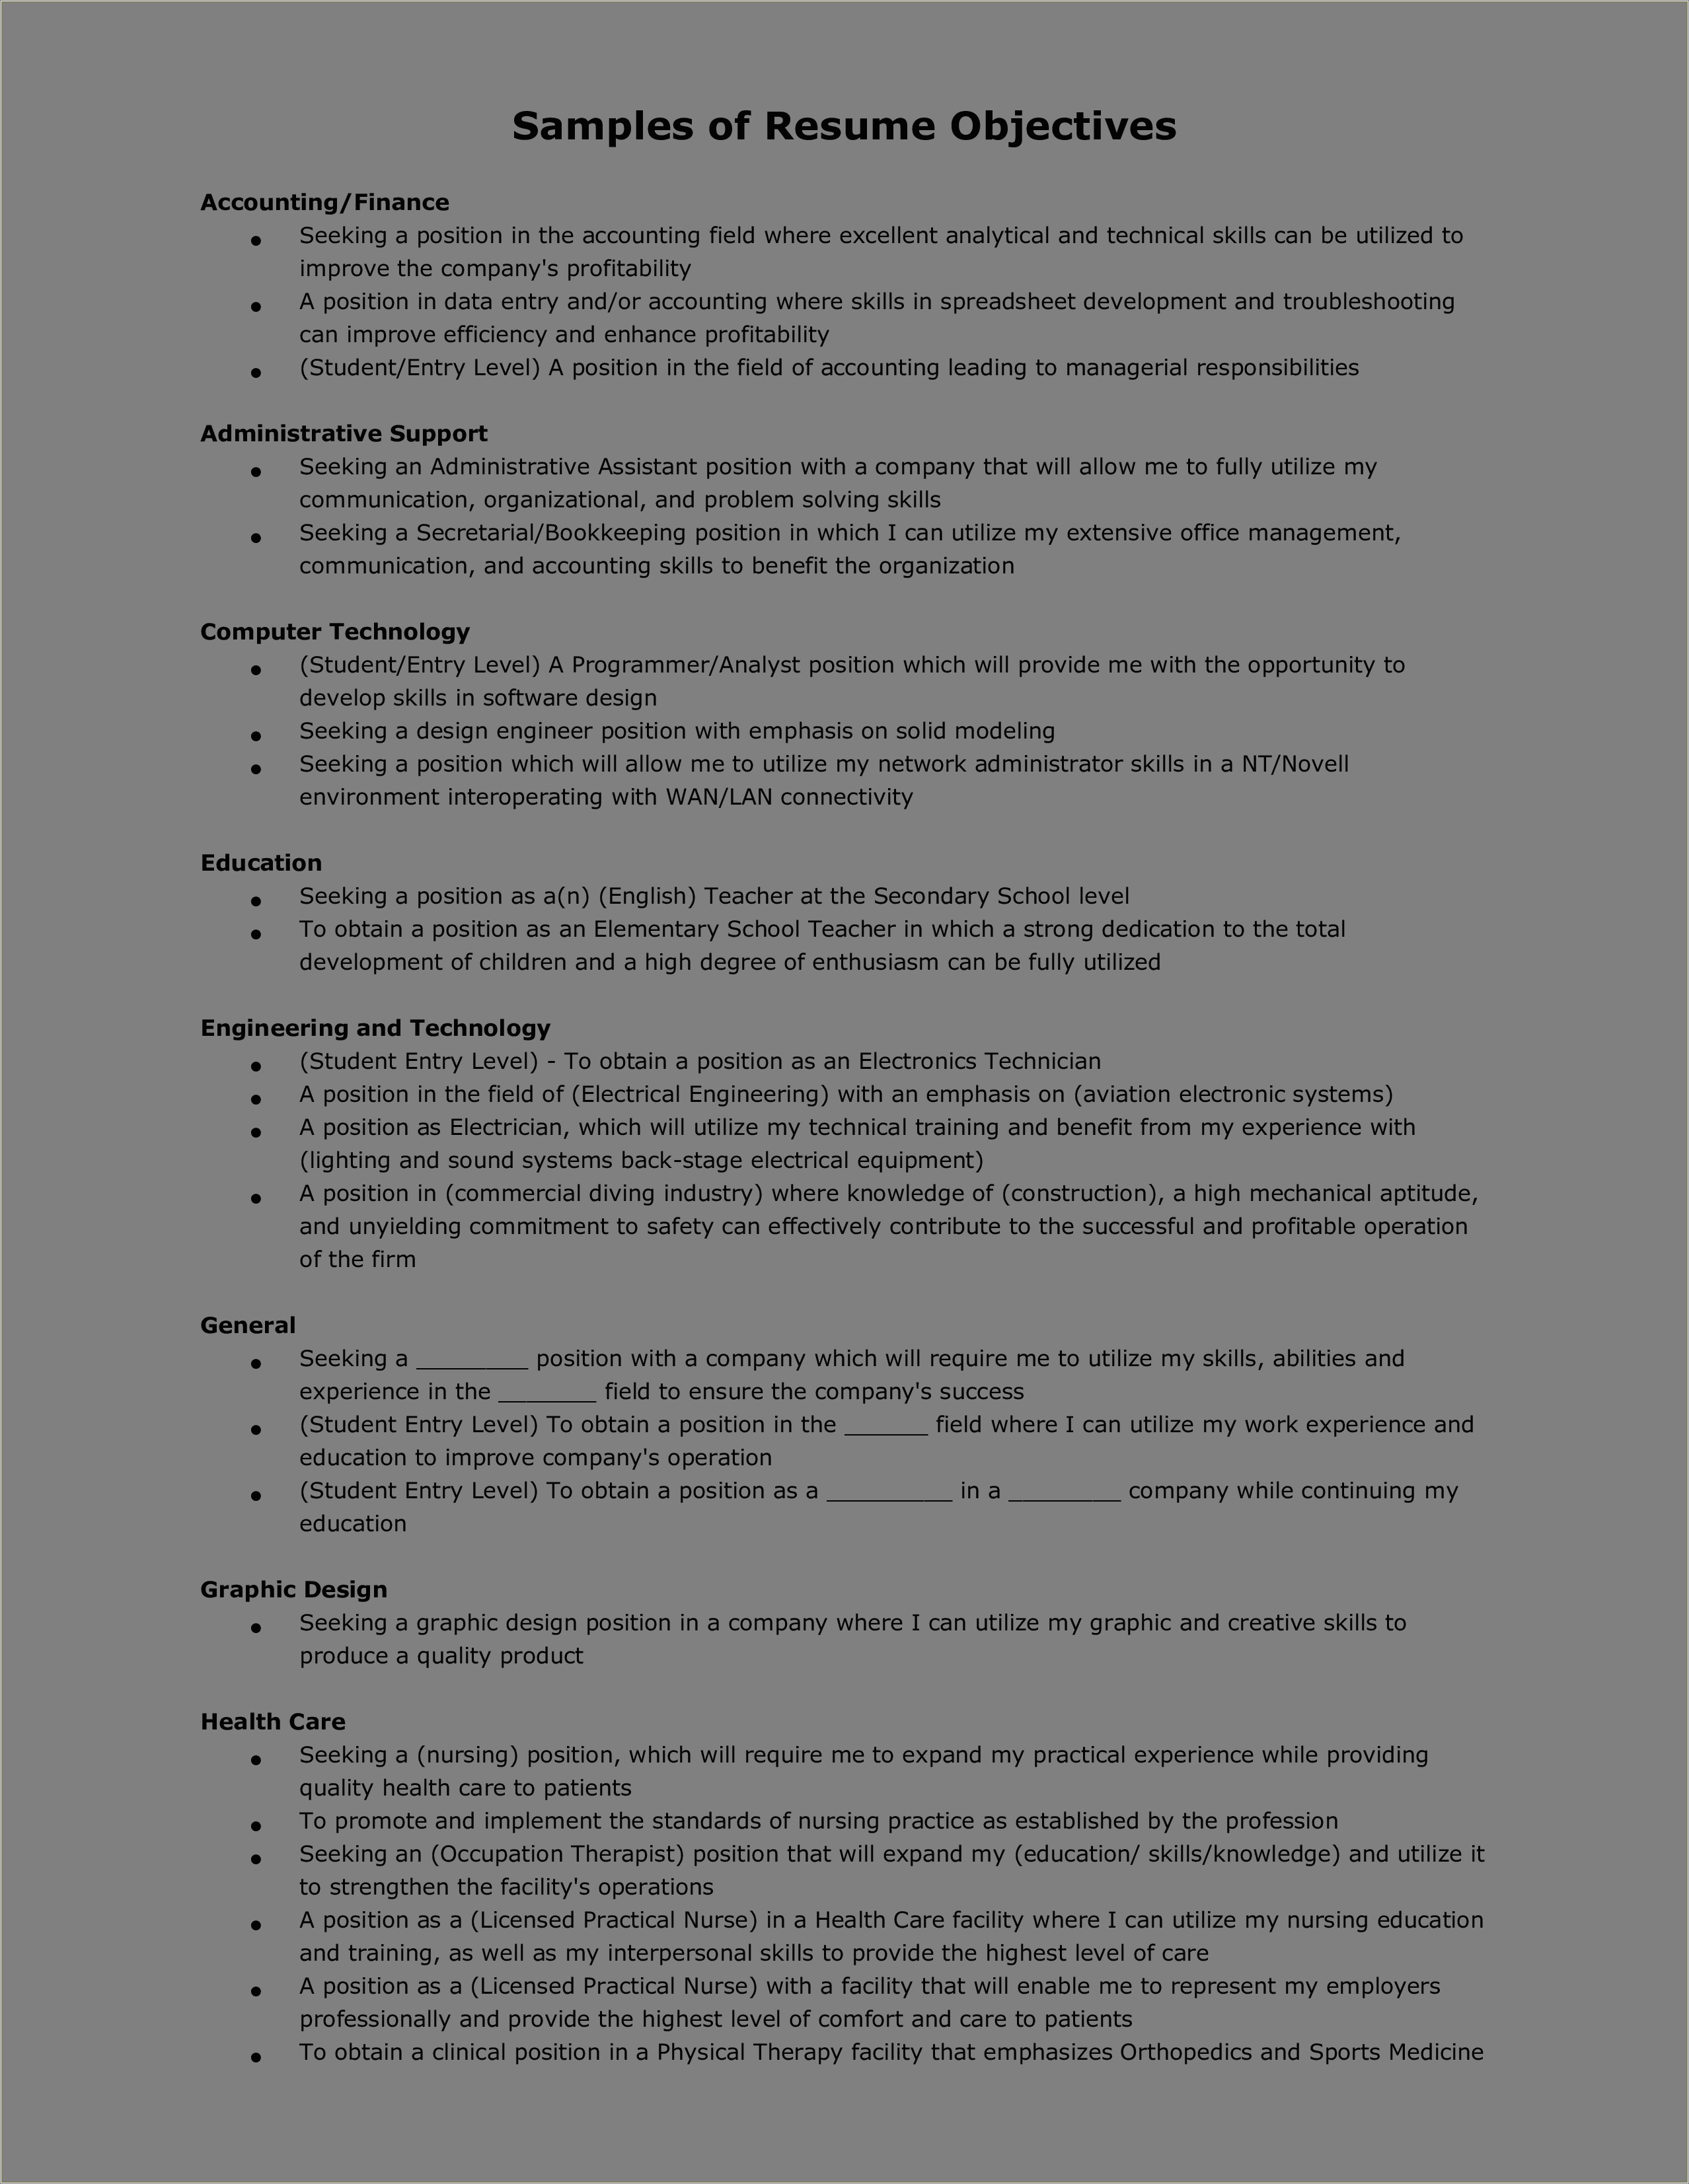 Writing A Resume Objective For A Creative Position